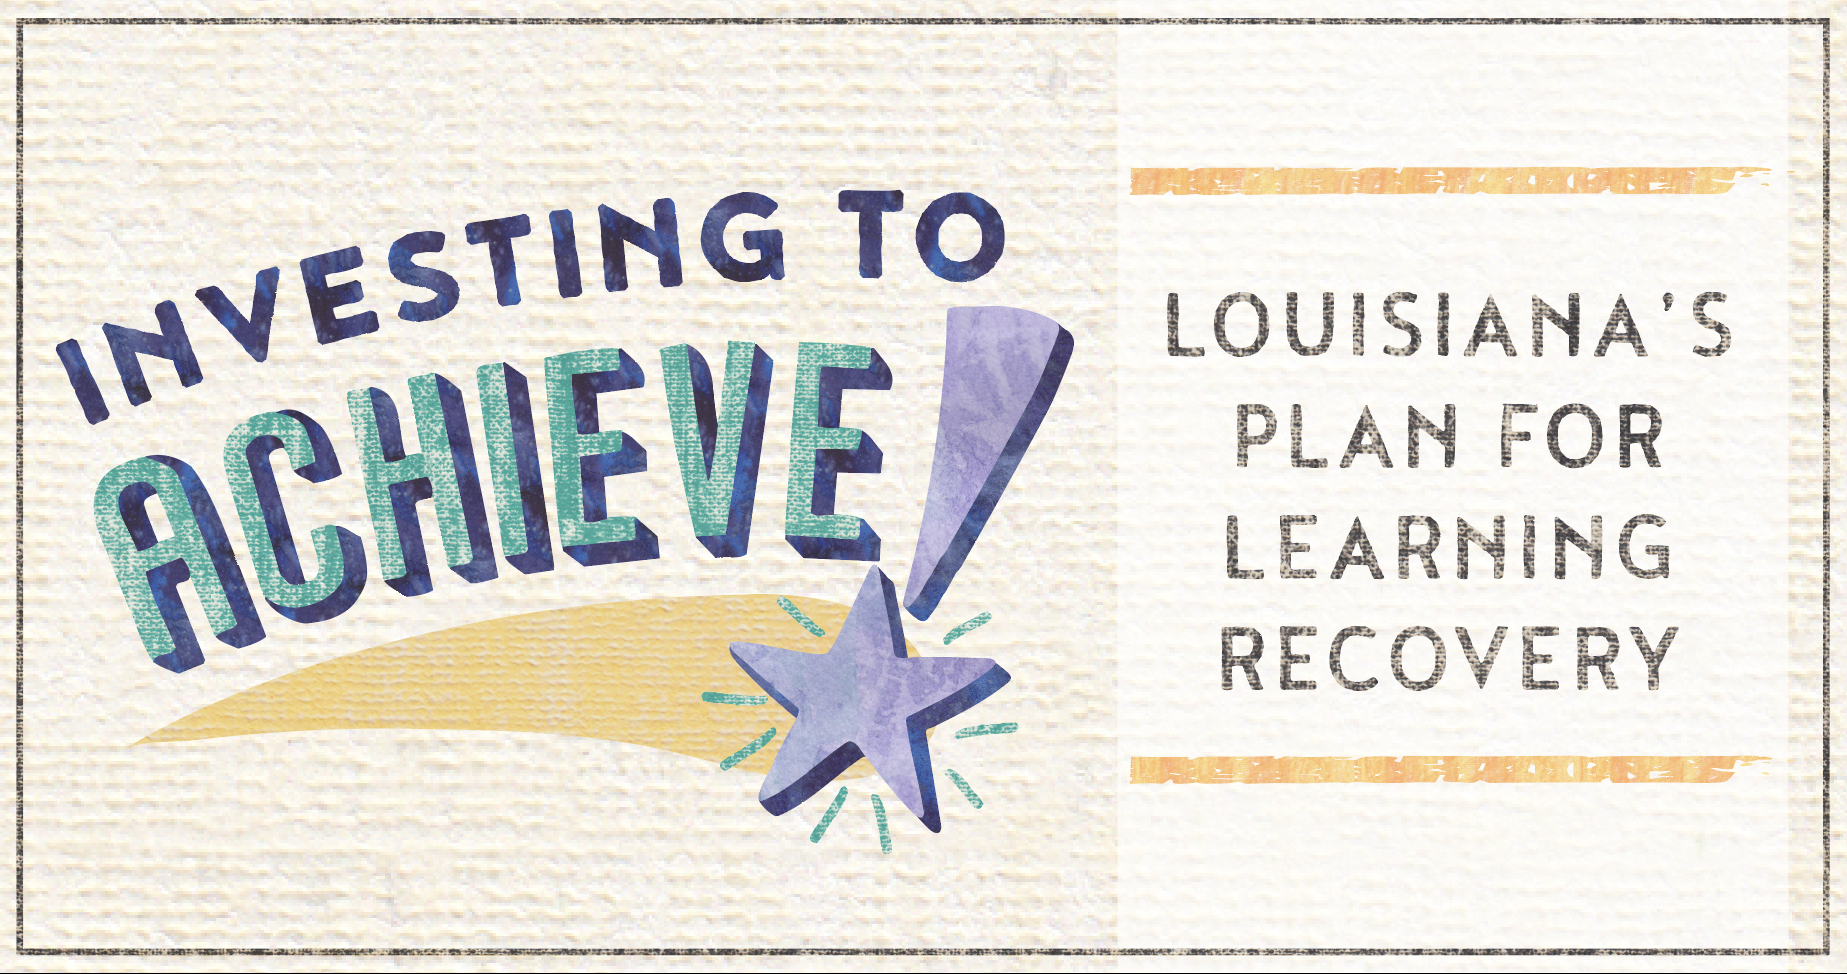 Investing to Achieve! Louisiana's Plan for Learning Recovery